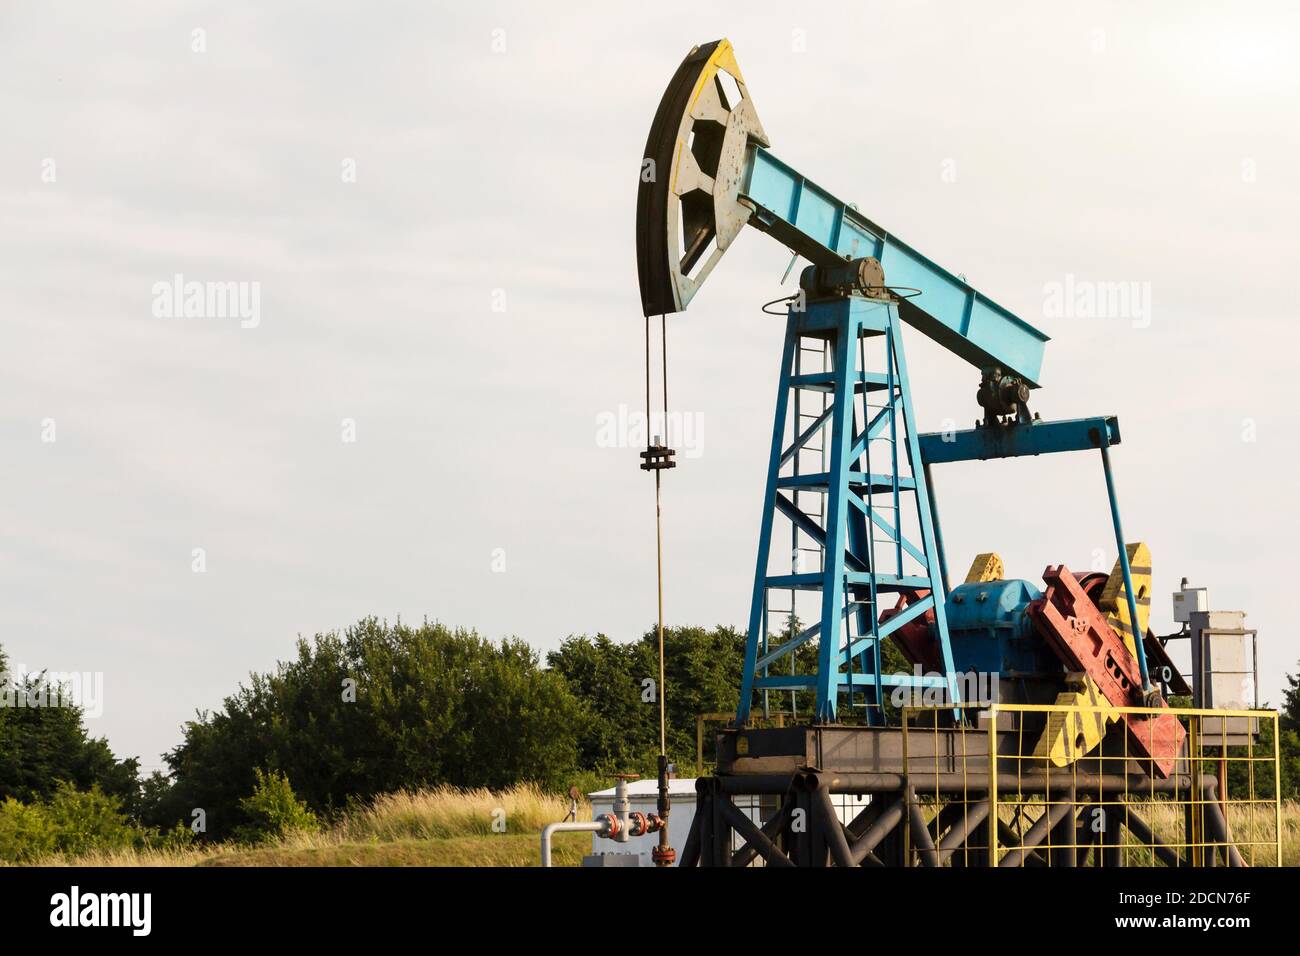 Oil rig. Oil pump. Equipment of the oil industry Stock Photo